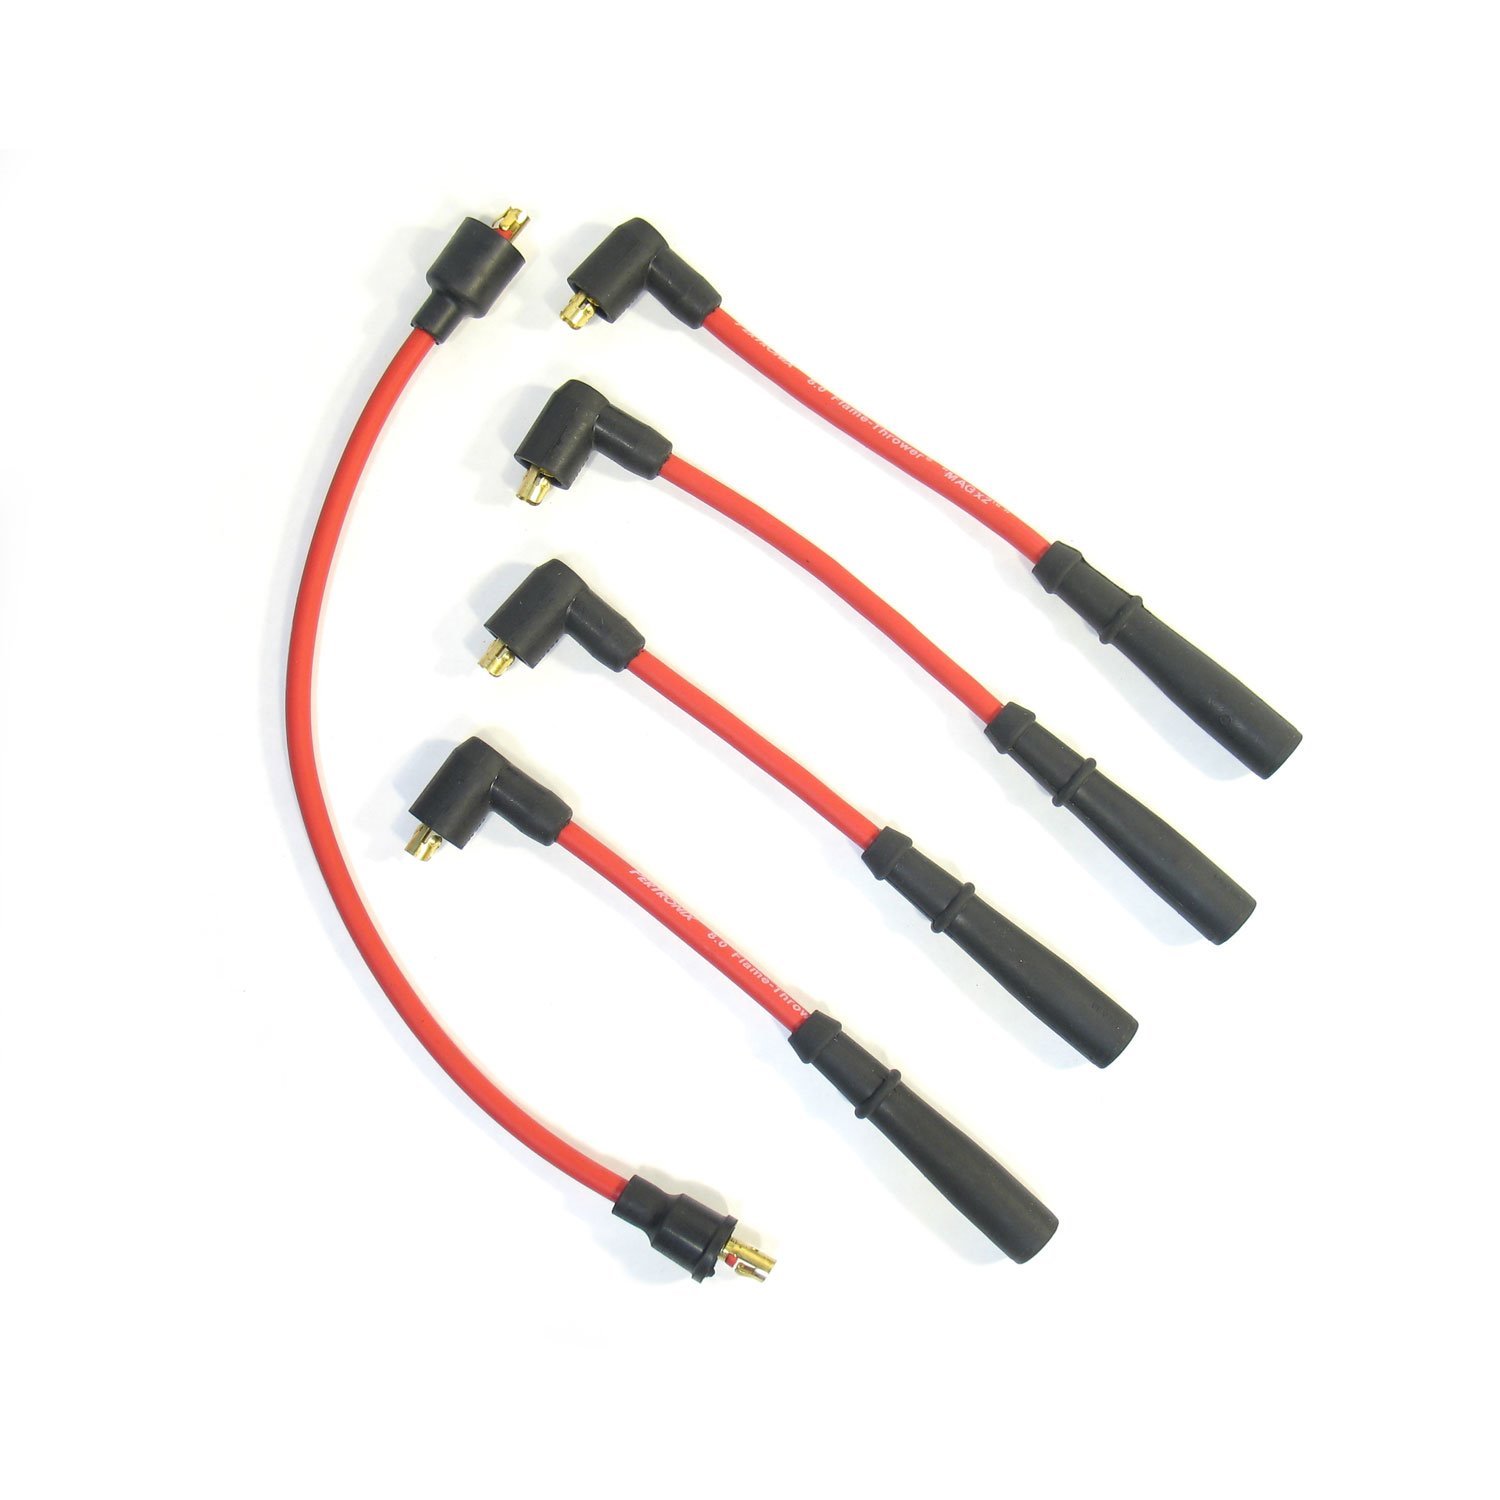 PerTronix 804414 Flame-Thrower Spark Plug Wires 4 cyl